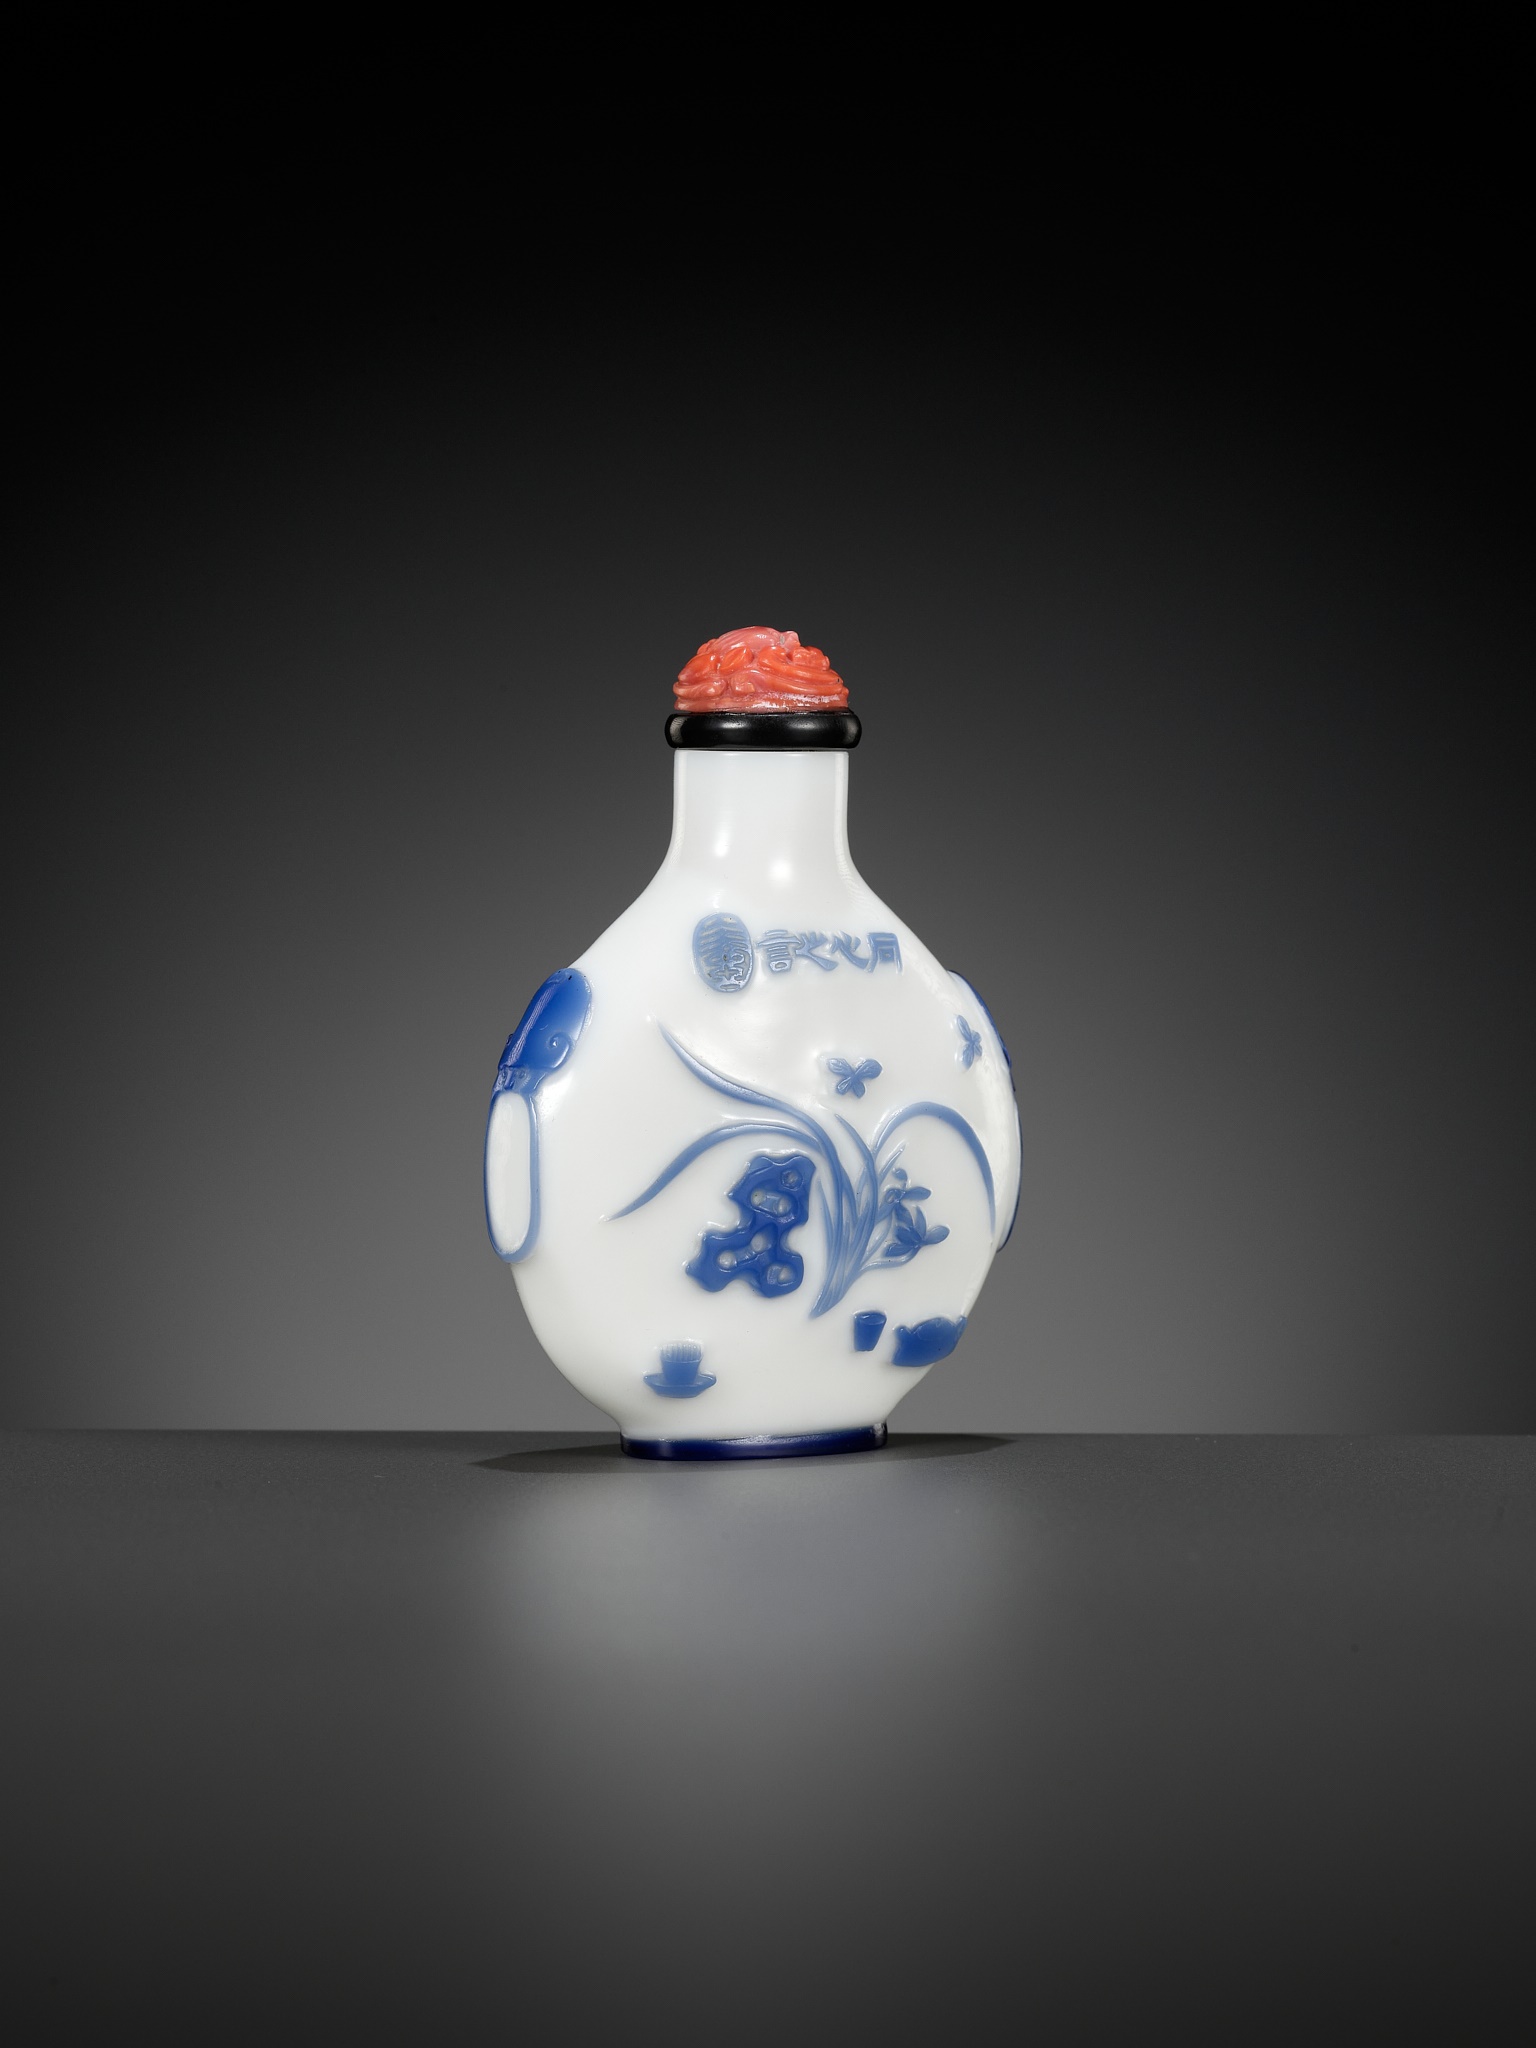 AN INSCRIBED SAPPHIRE-BLUE OVERLAY GLASS SNUFF BOTTLE, YANGZHOU SCHOOL, CHINA, 1800-1880 - Image 15 of 20